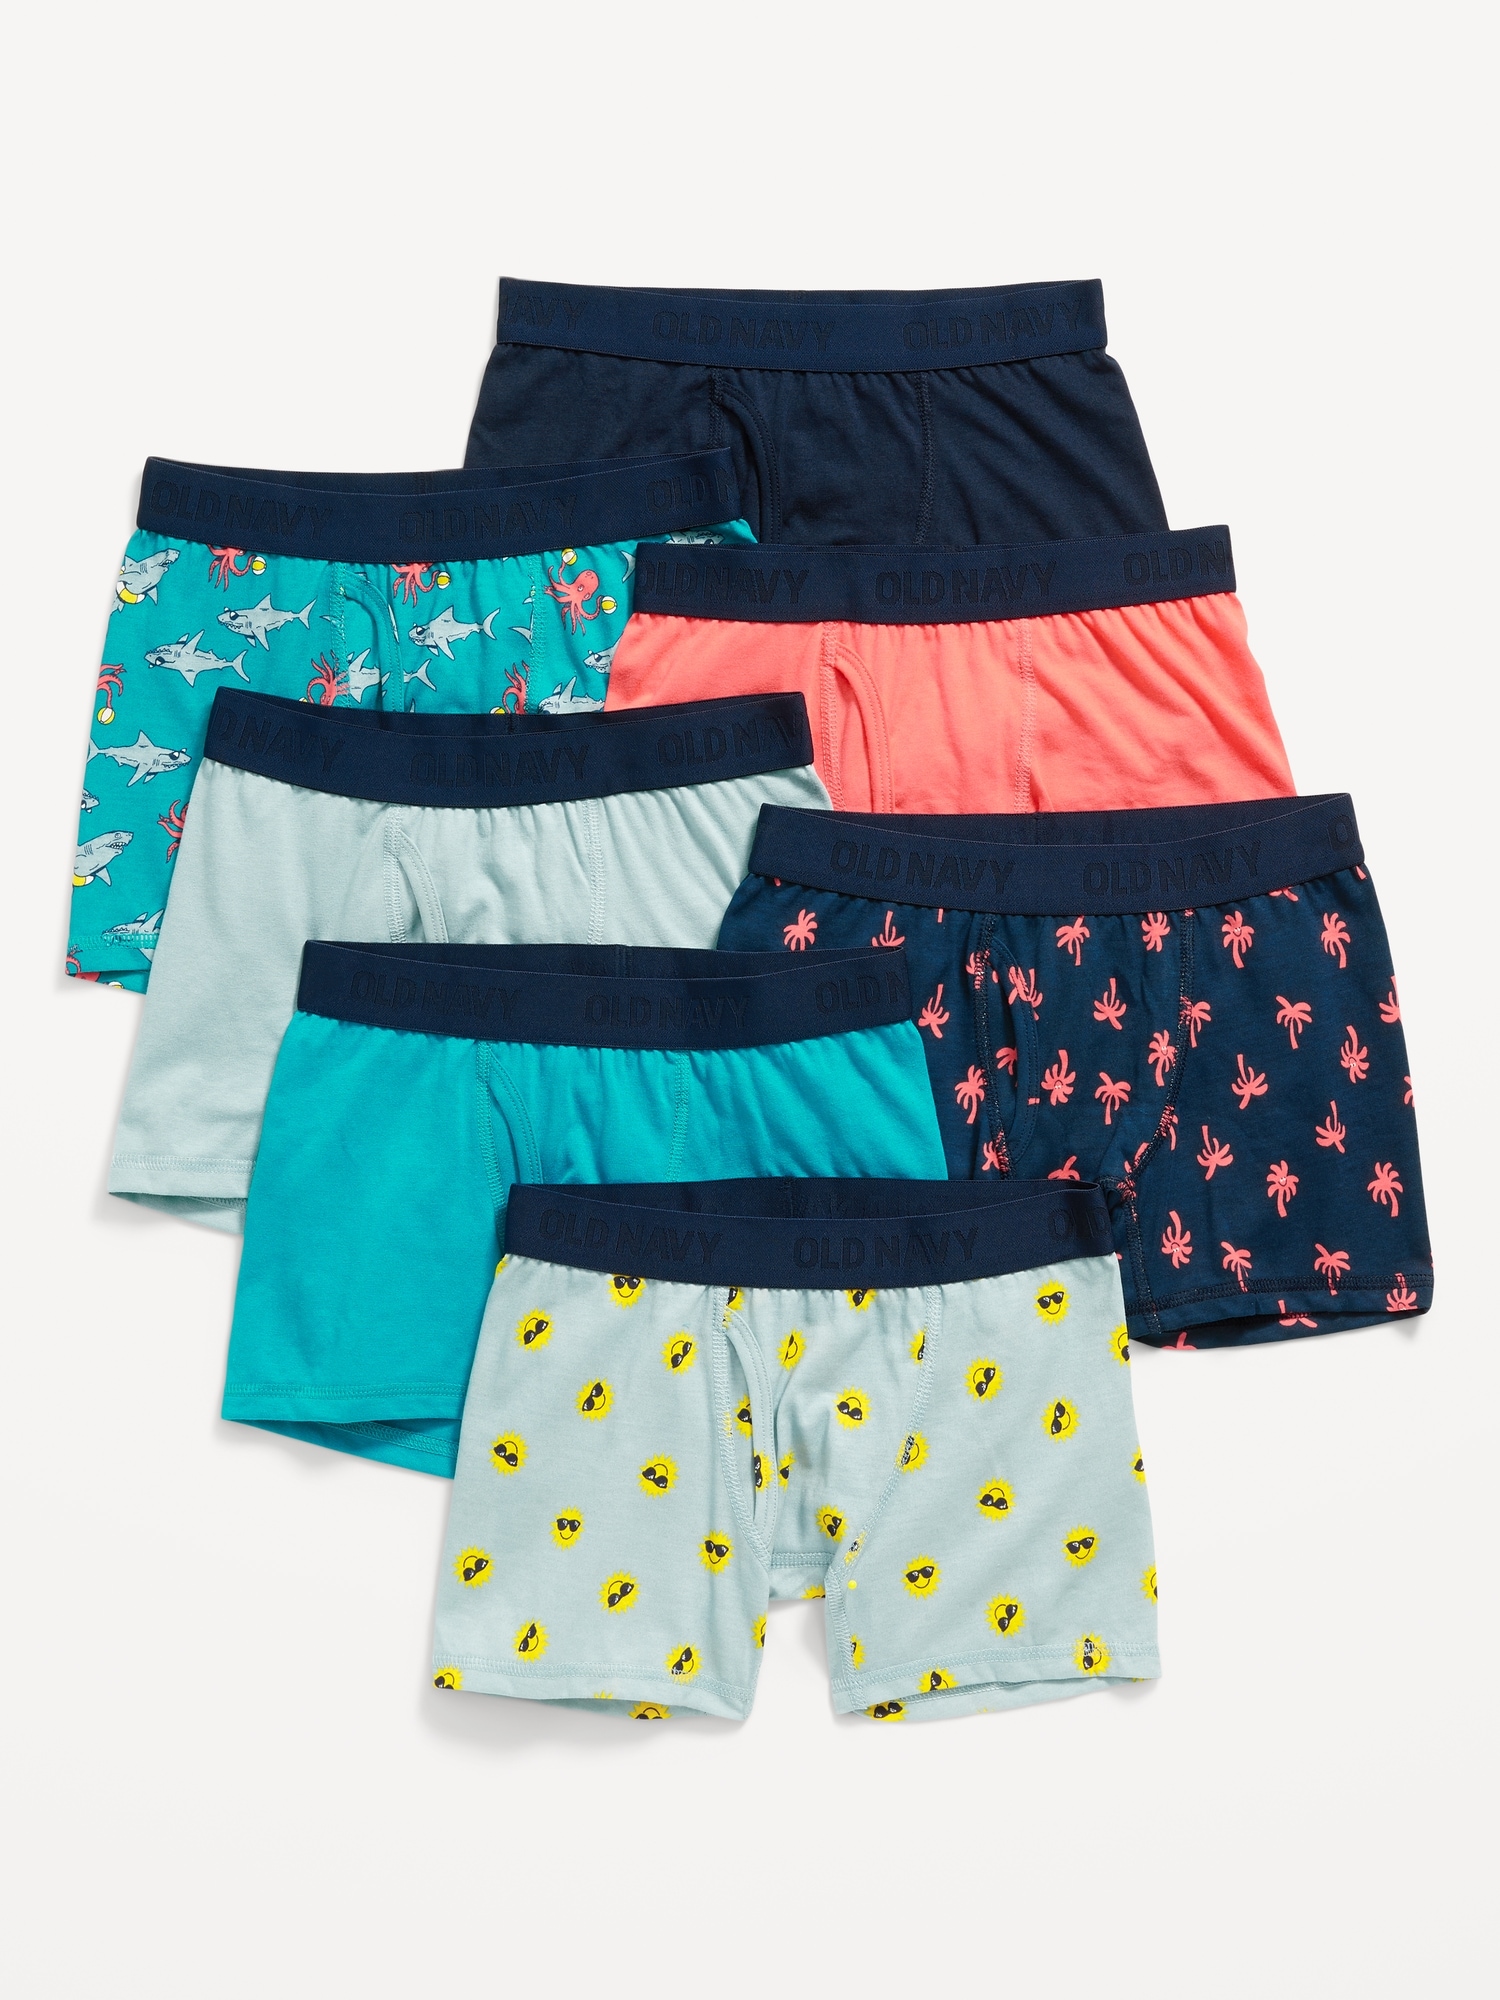 Old Navy Printed Boxer-Briefs Underwear 7-Pack for Boys red